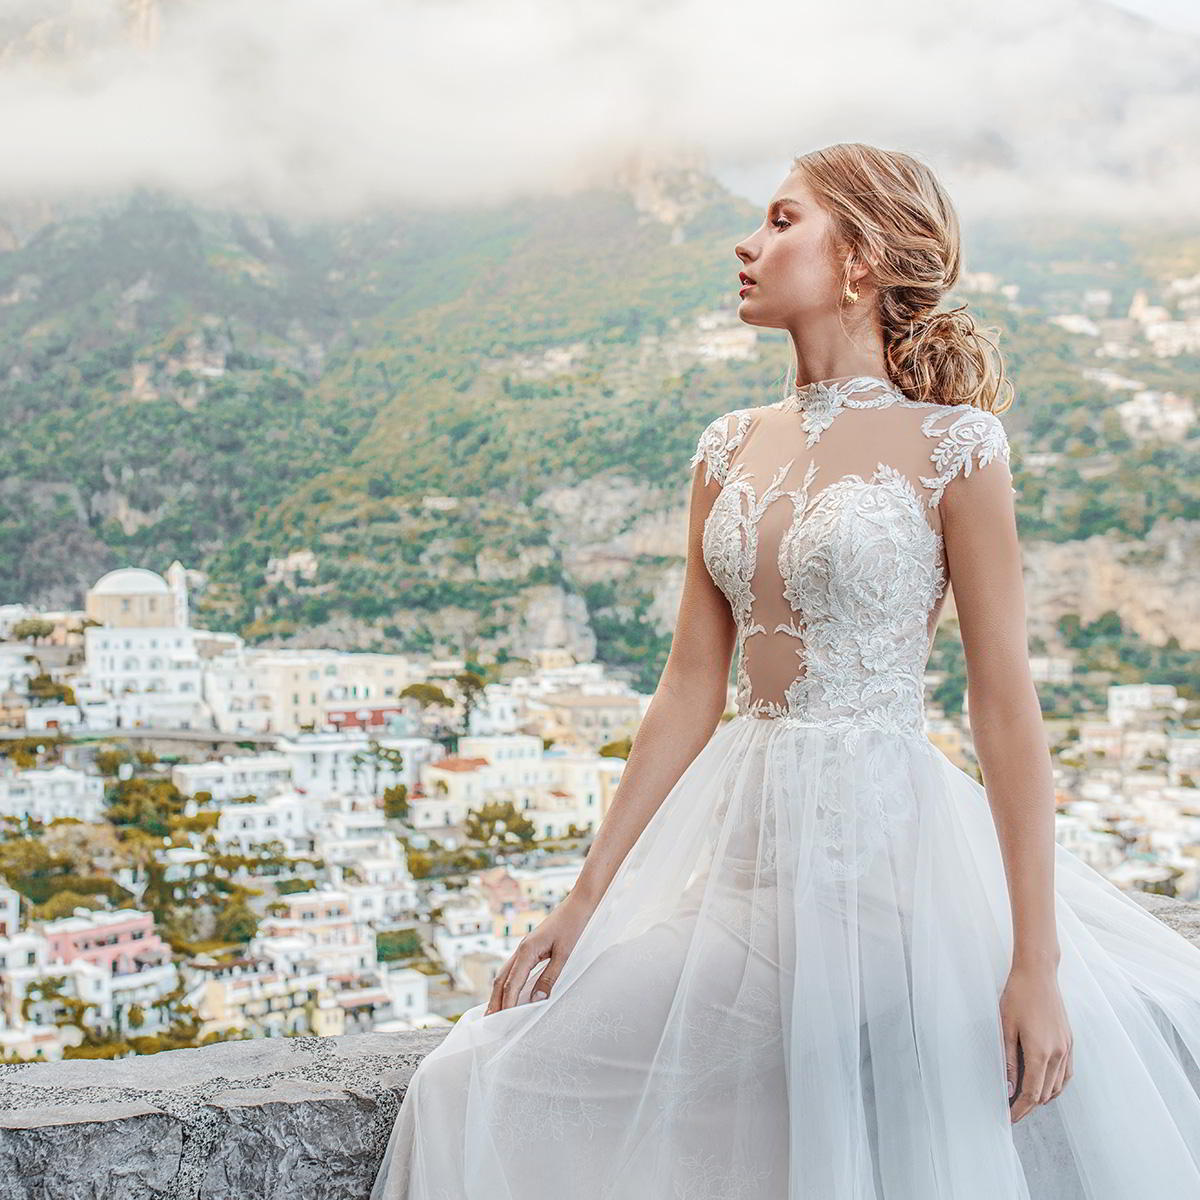 katherine joyce 2019 bridal wedding inspirasi featured wedding gowns dresses and collection